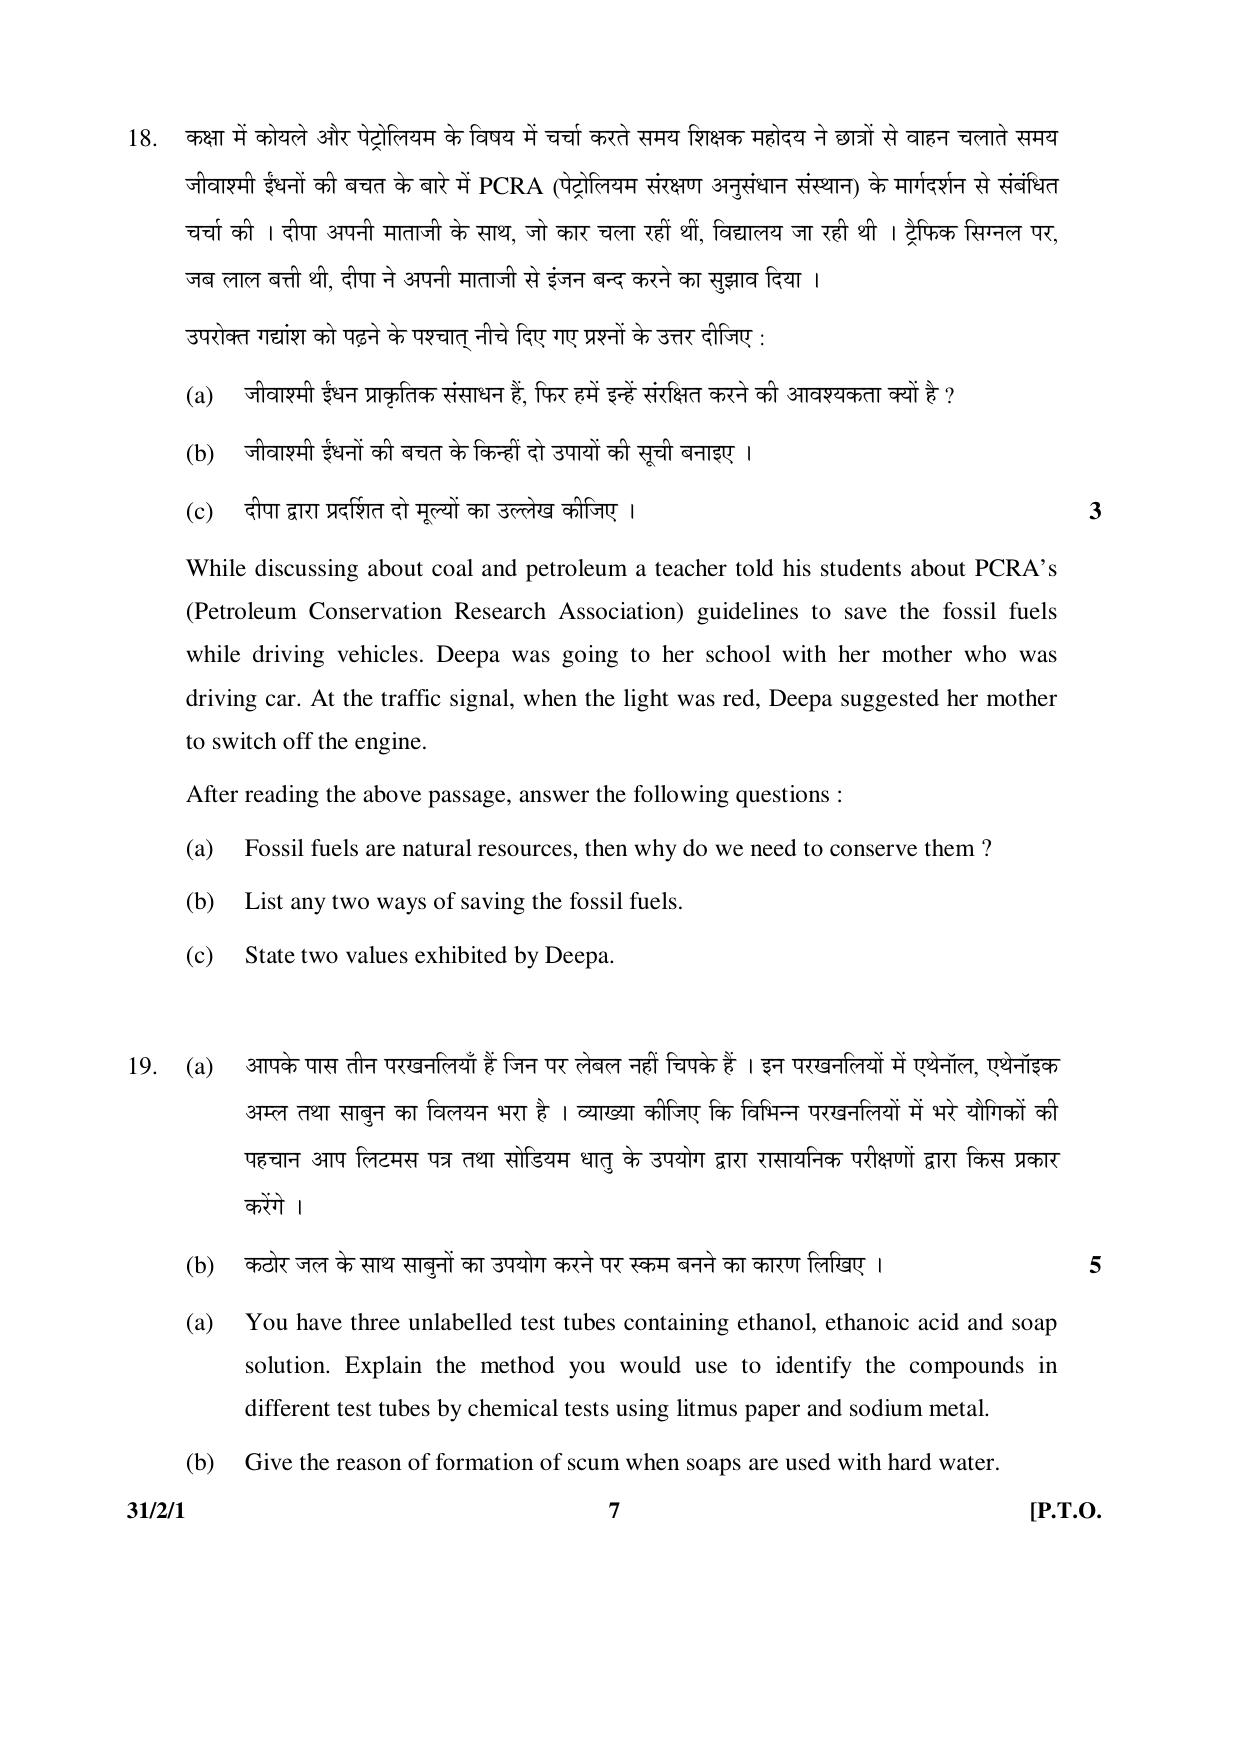 CBSE Class 10 31-2-1 _Science 2016 Question Paper - Page 7